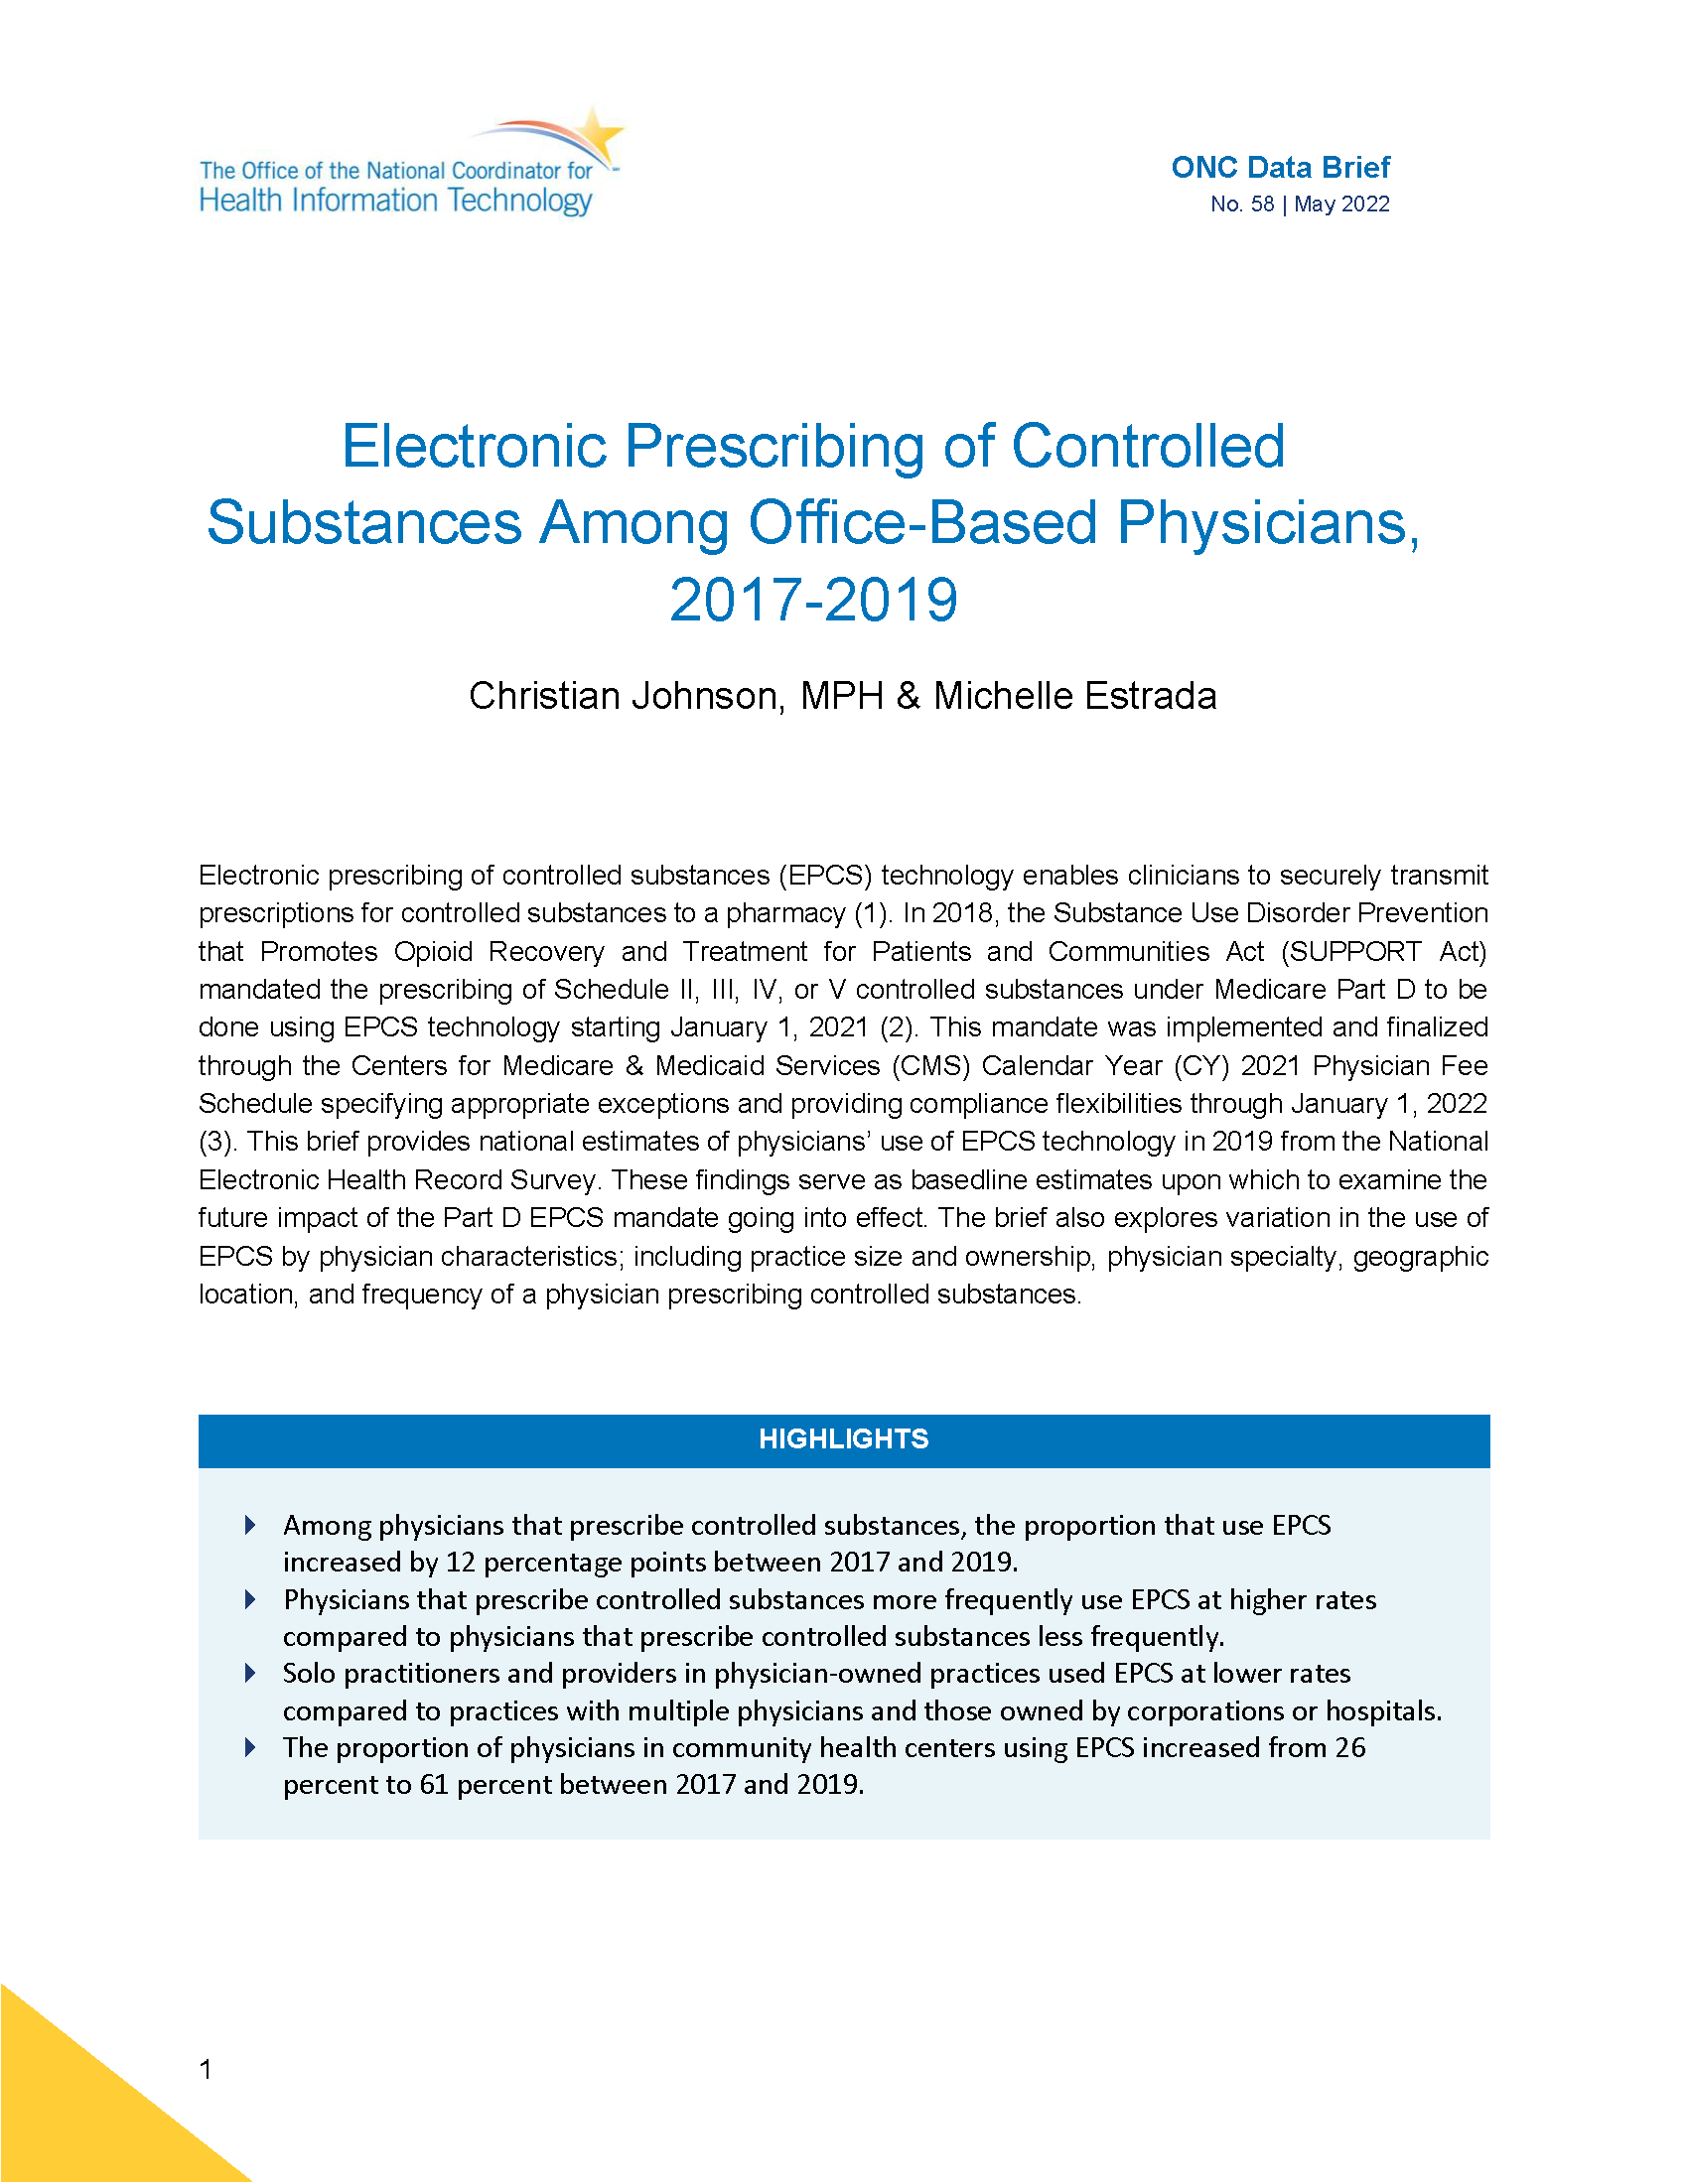 Electronic Prescribing of Controlled Substances Among Office-Based Physicians, 2017-2019